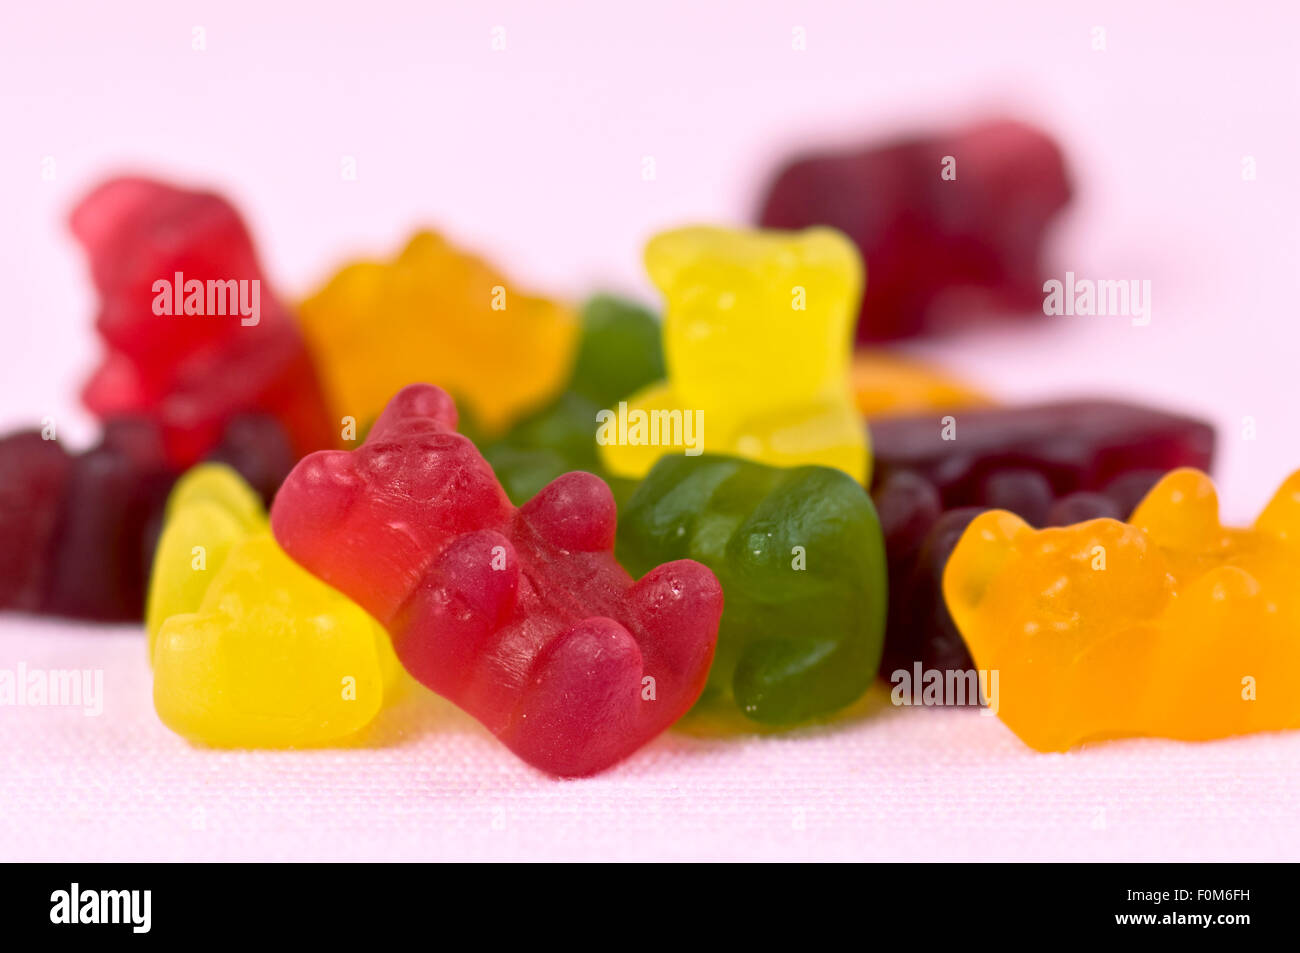 Jelly bears (also called gummy or gummi bears) on pink background Stock Photo